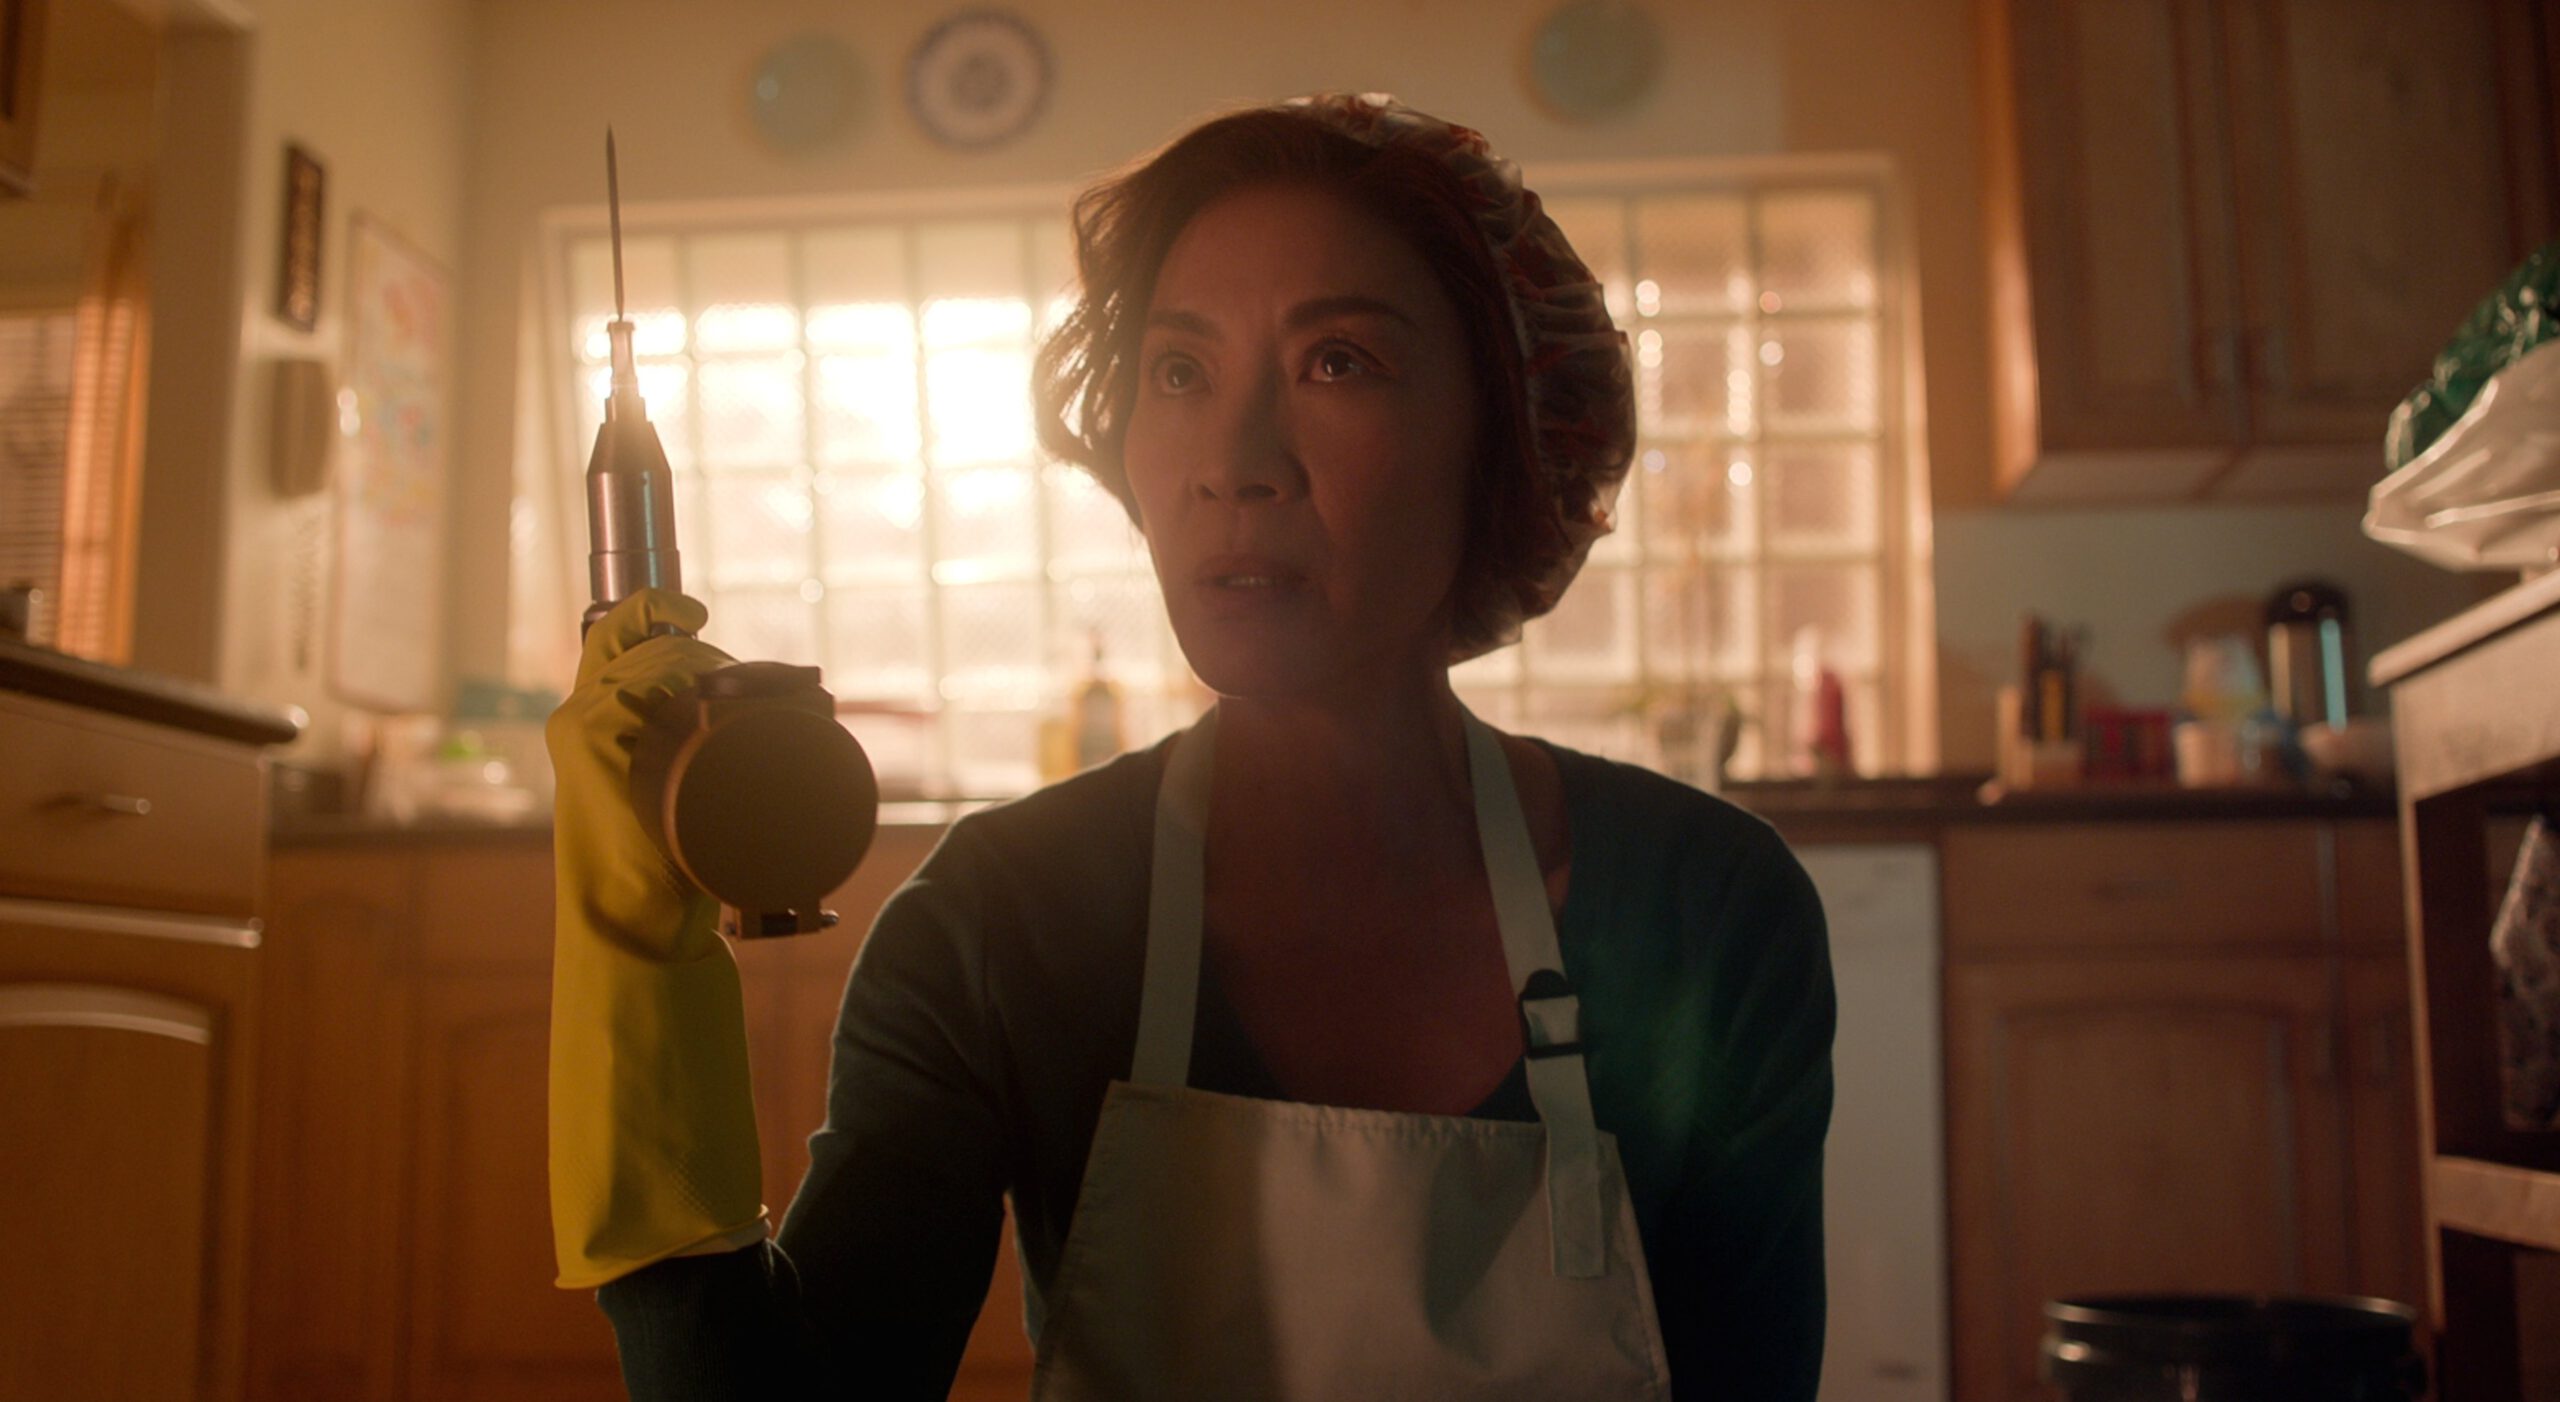 A woman in a hairnet and apron holds up a drill while kneeling on the kitchen floor.